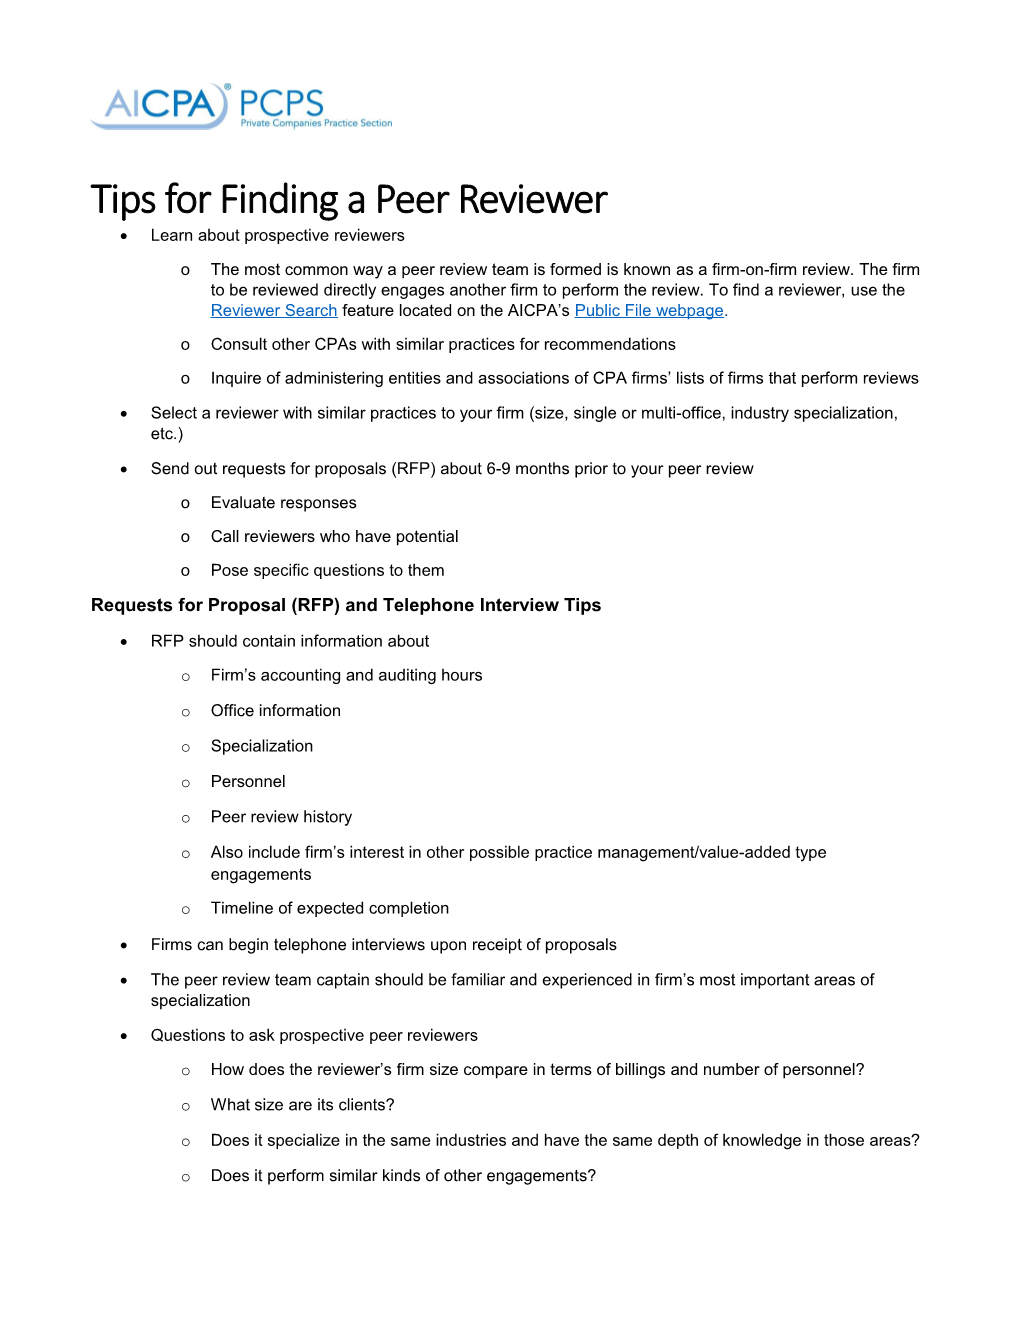 Find a Peer Reviewer